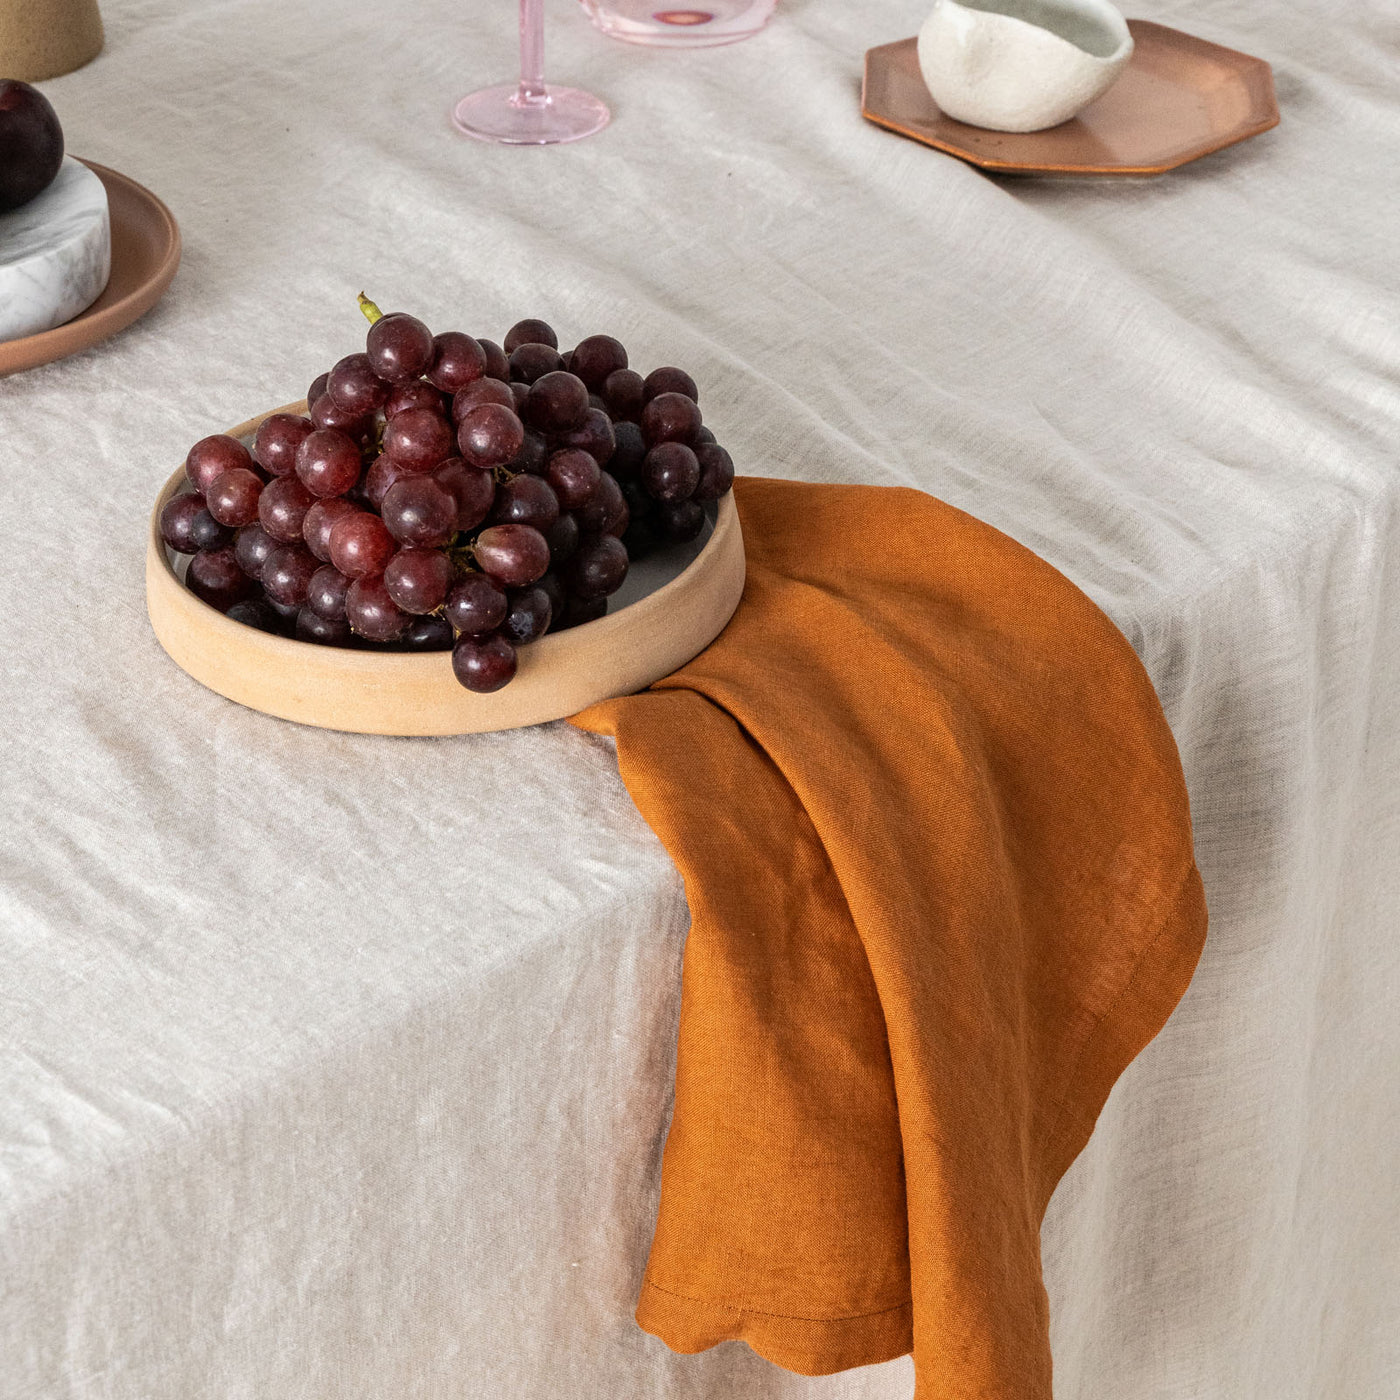 French Flax Linen Napkins (Set Of 4) in Ochre